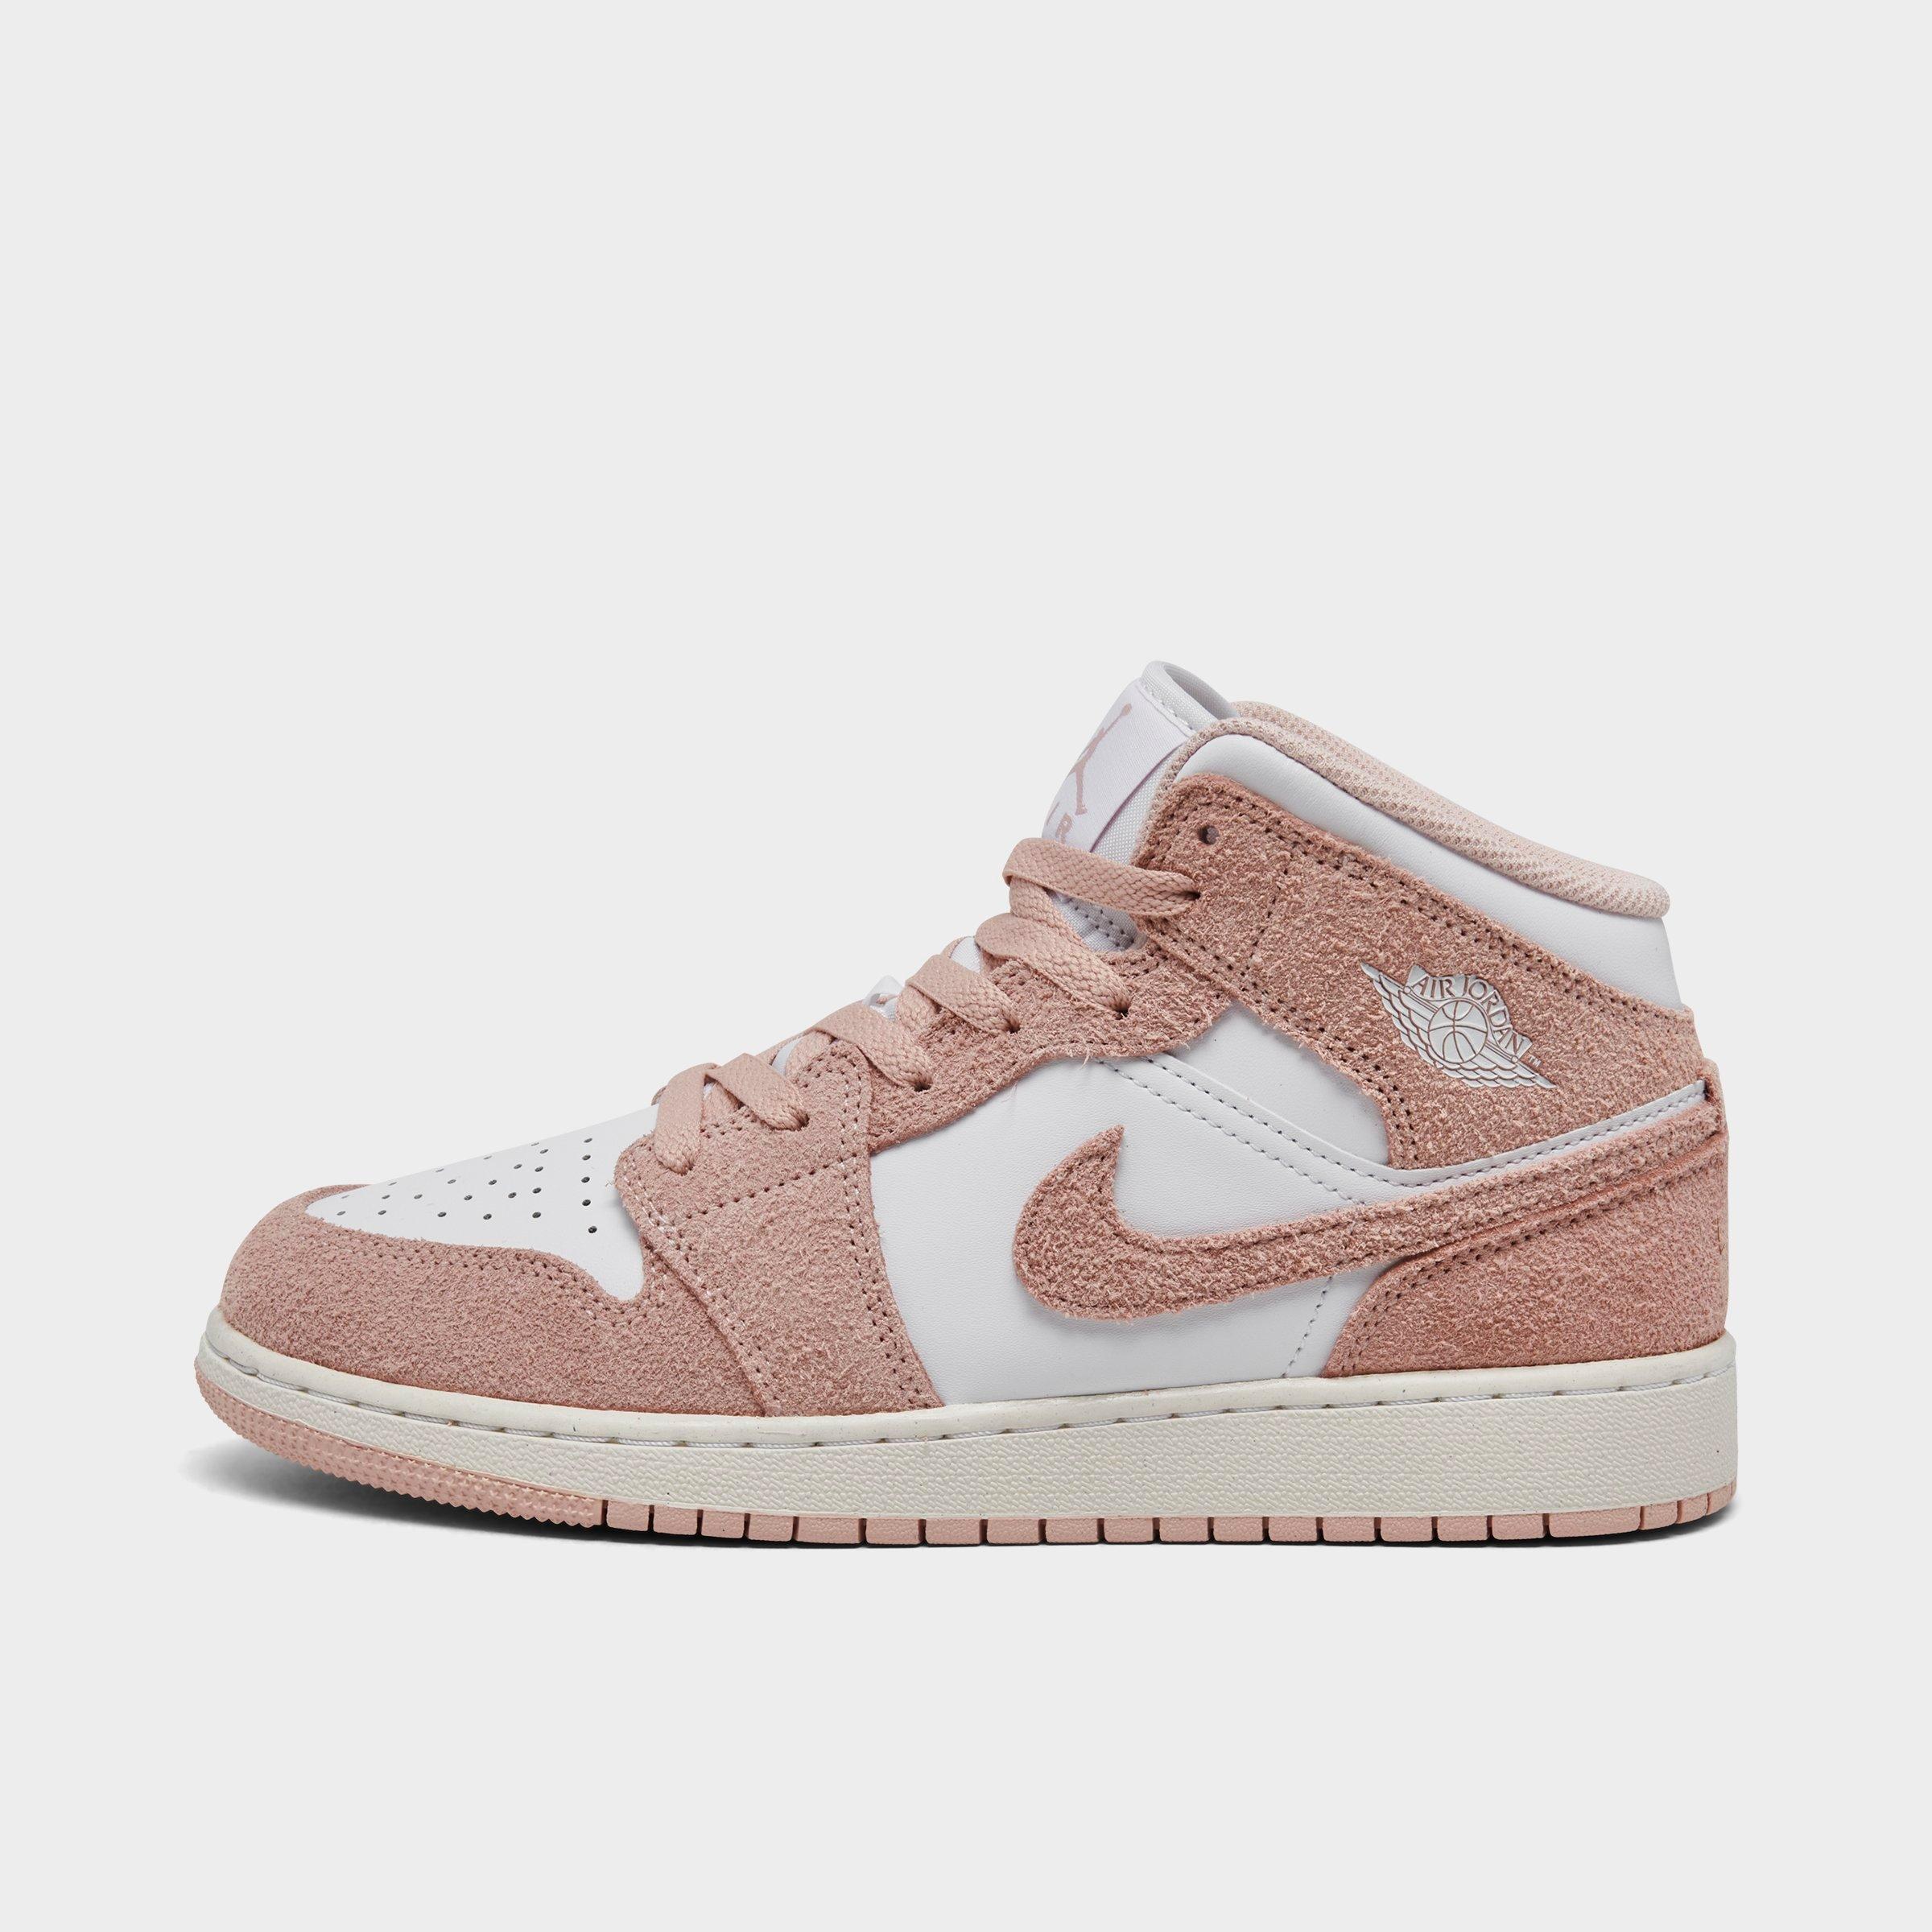 Nike Big Kids' Air Jordan Retro 1 Mid Se Casual Shoes Size 7.0 Leather In Pink